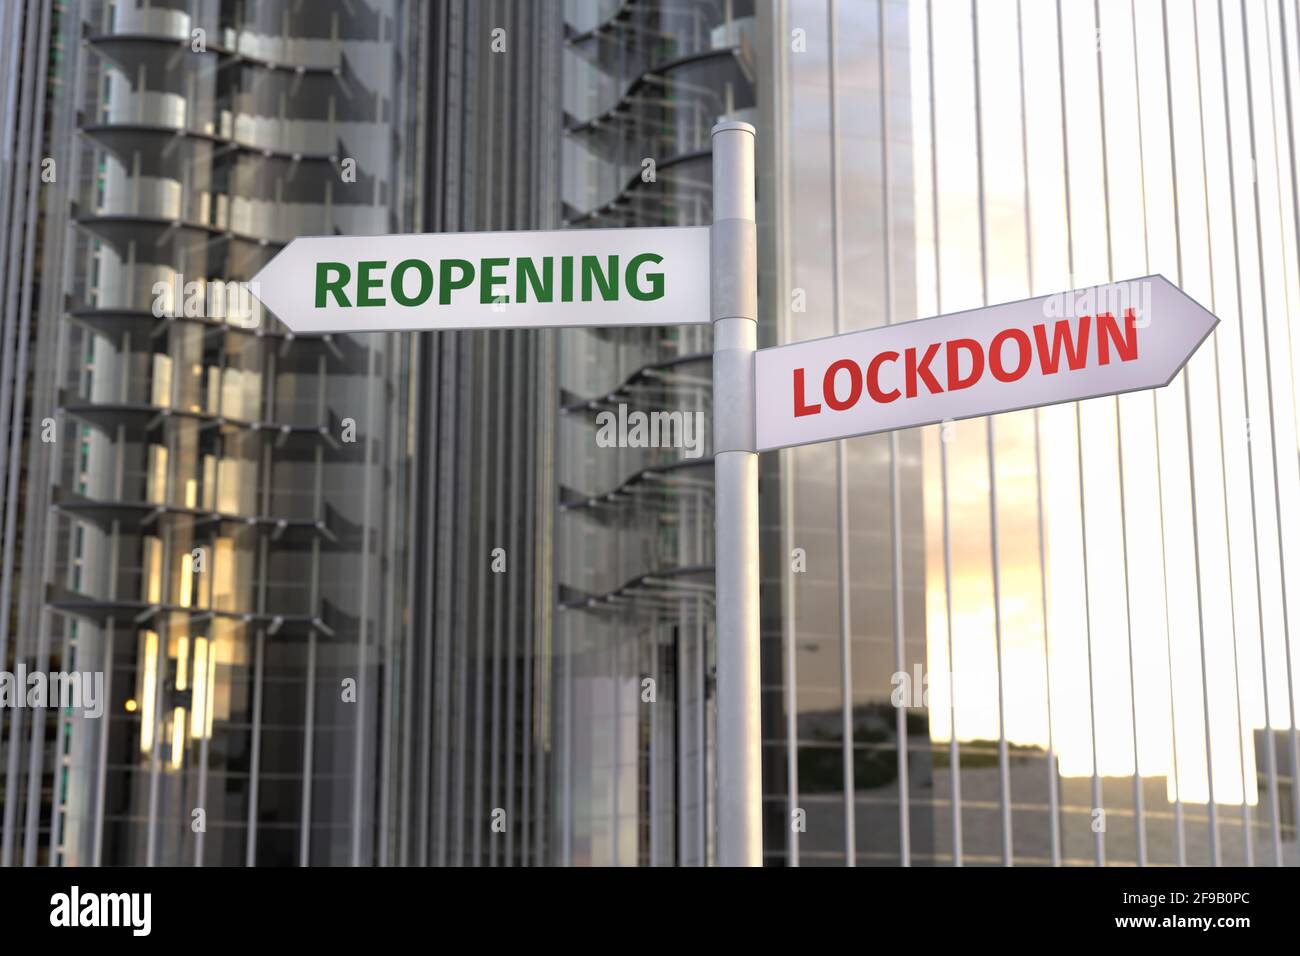 Corona crisis concept: Lockdown or reopening - two contrarian strategies symbolized by two street signs pointing into different directions. Stock Photo